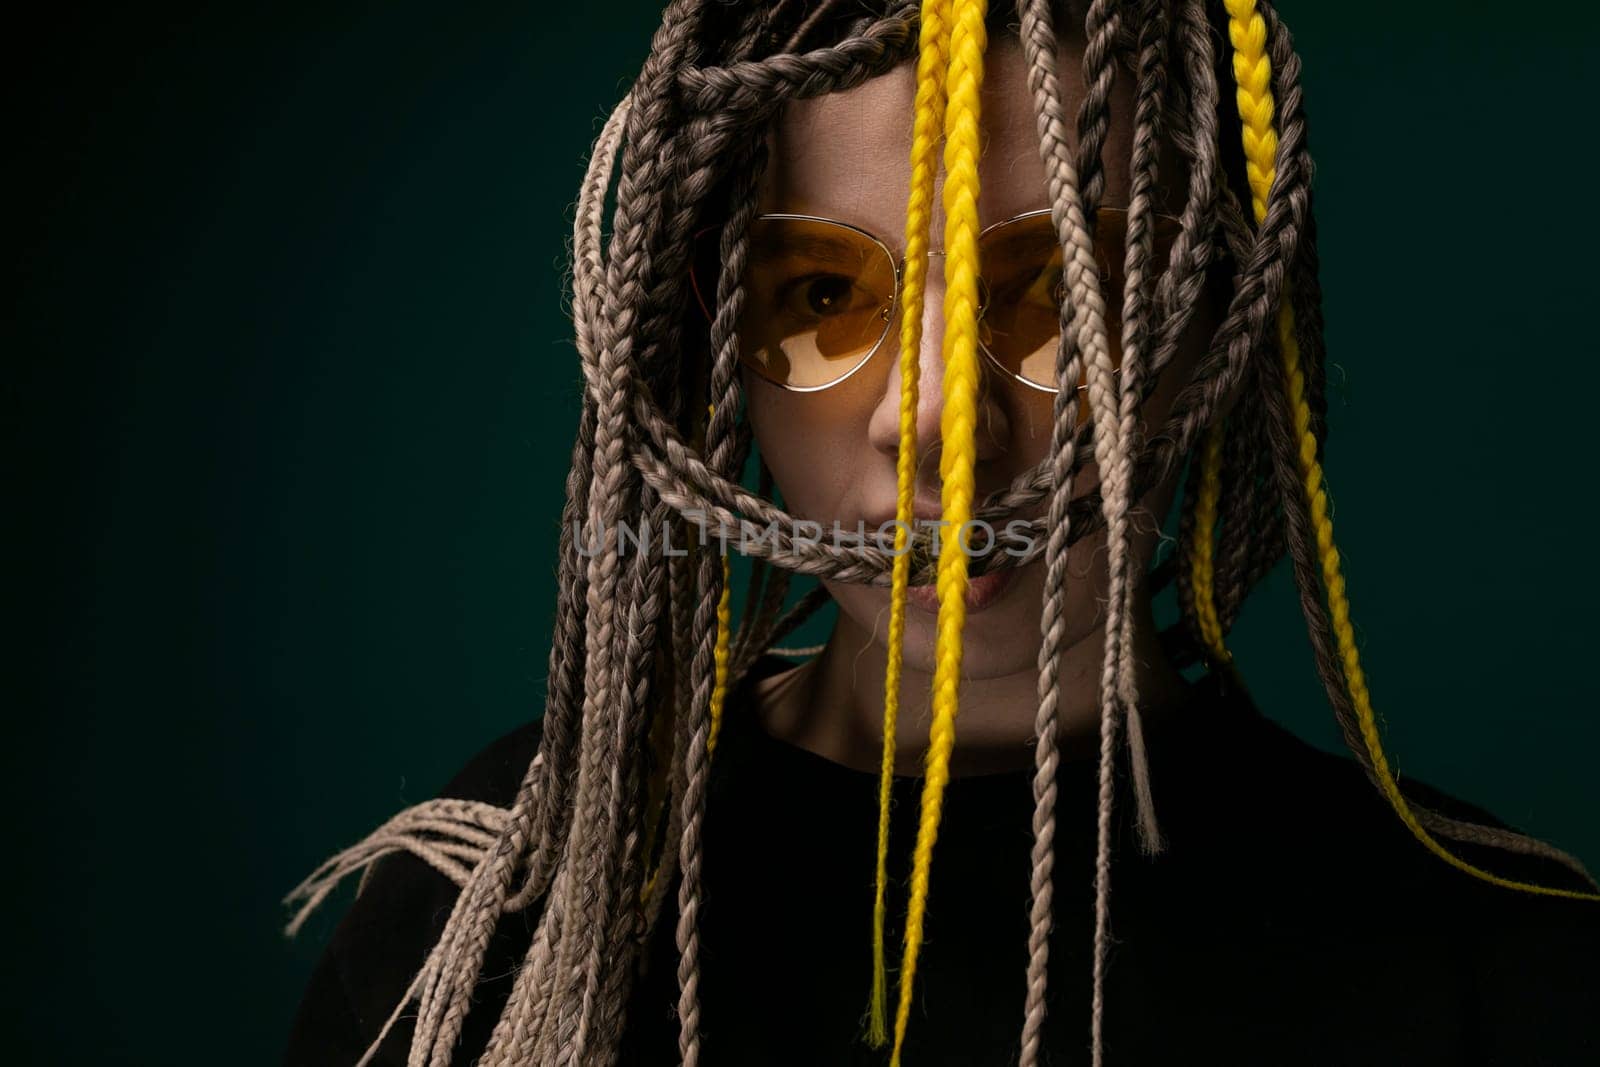 Woman With Yellow Dreadlocks and Black Shirt by TRMK